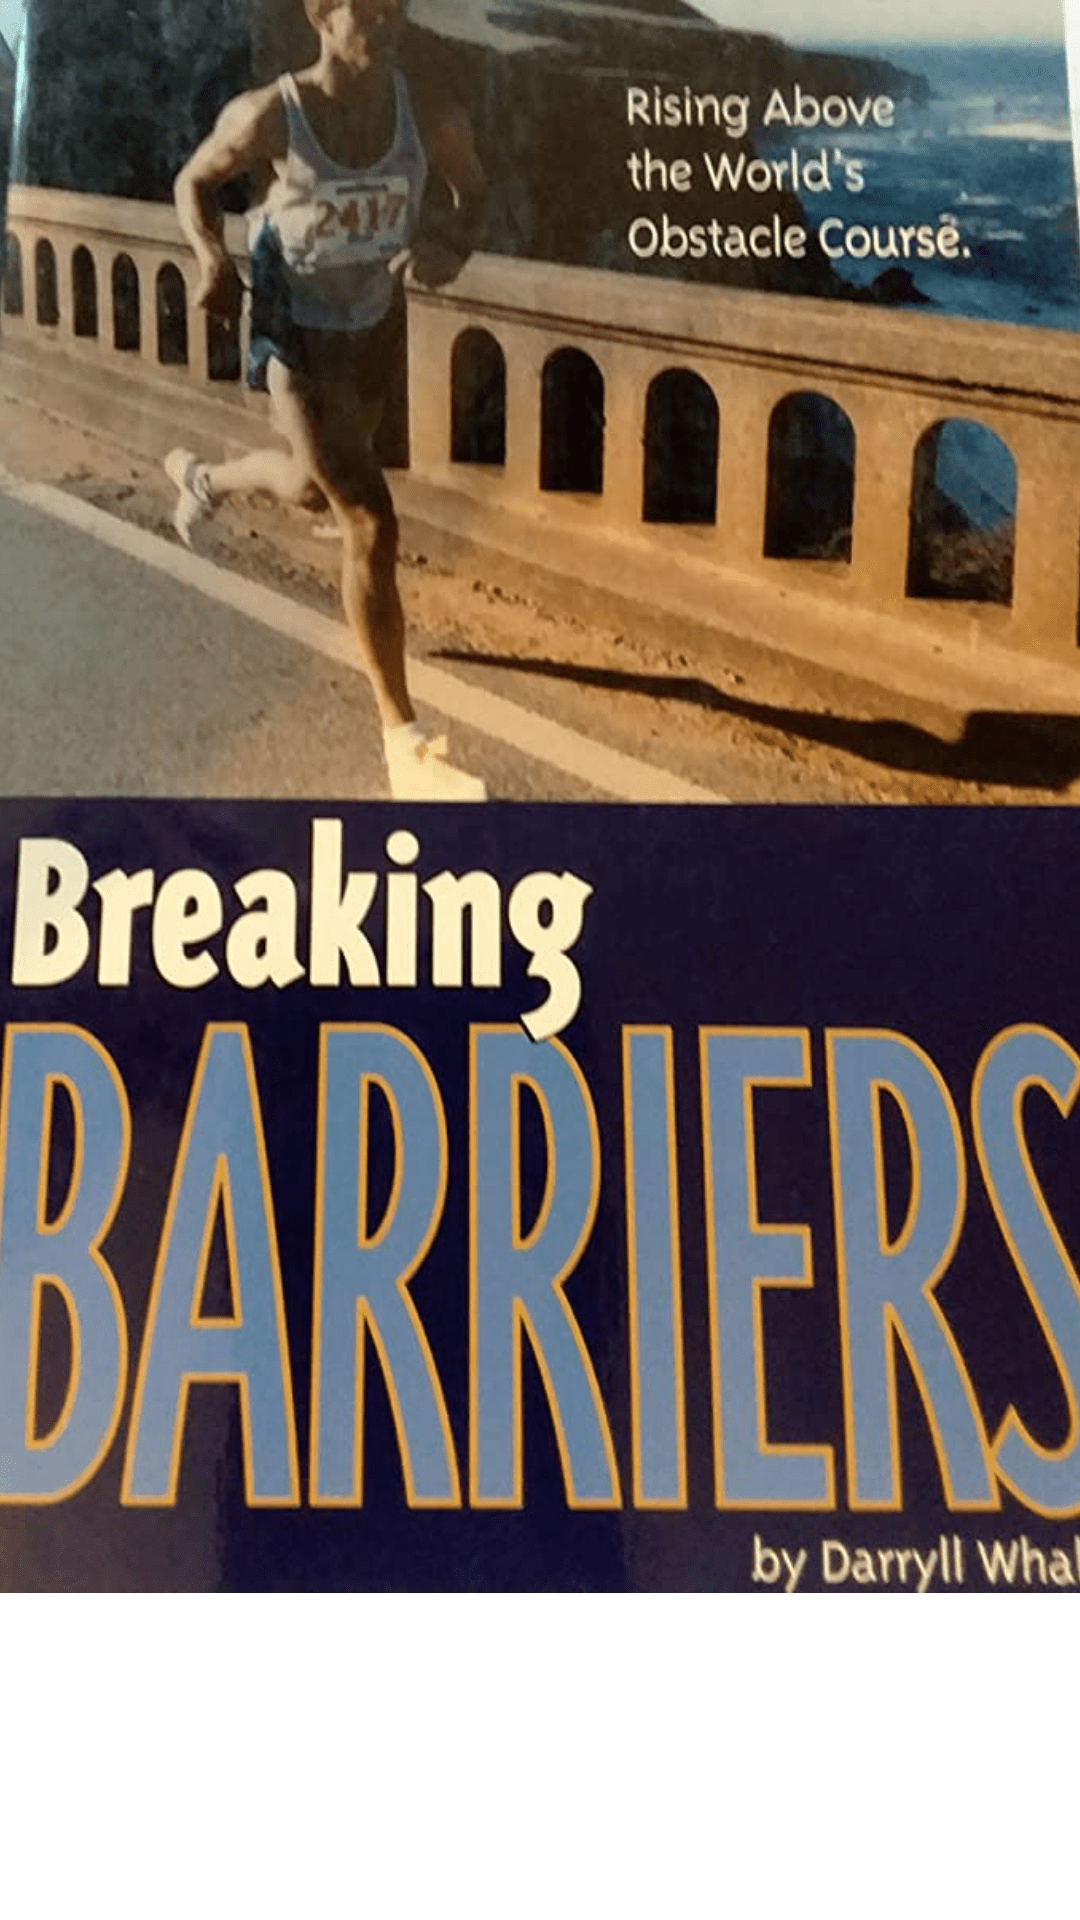 Breaking Barriers: Rising Above the World's Obstacle Course